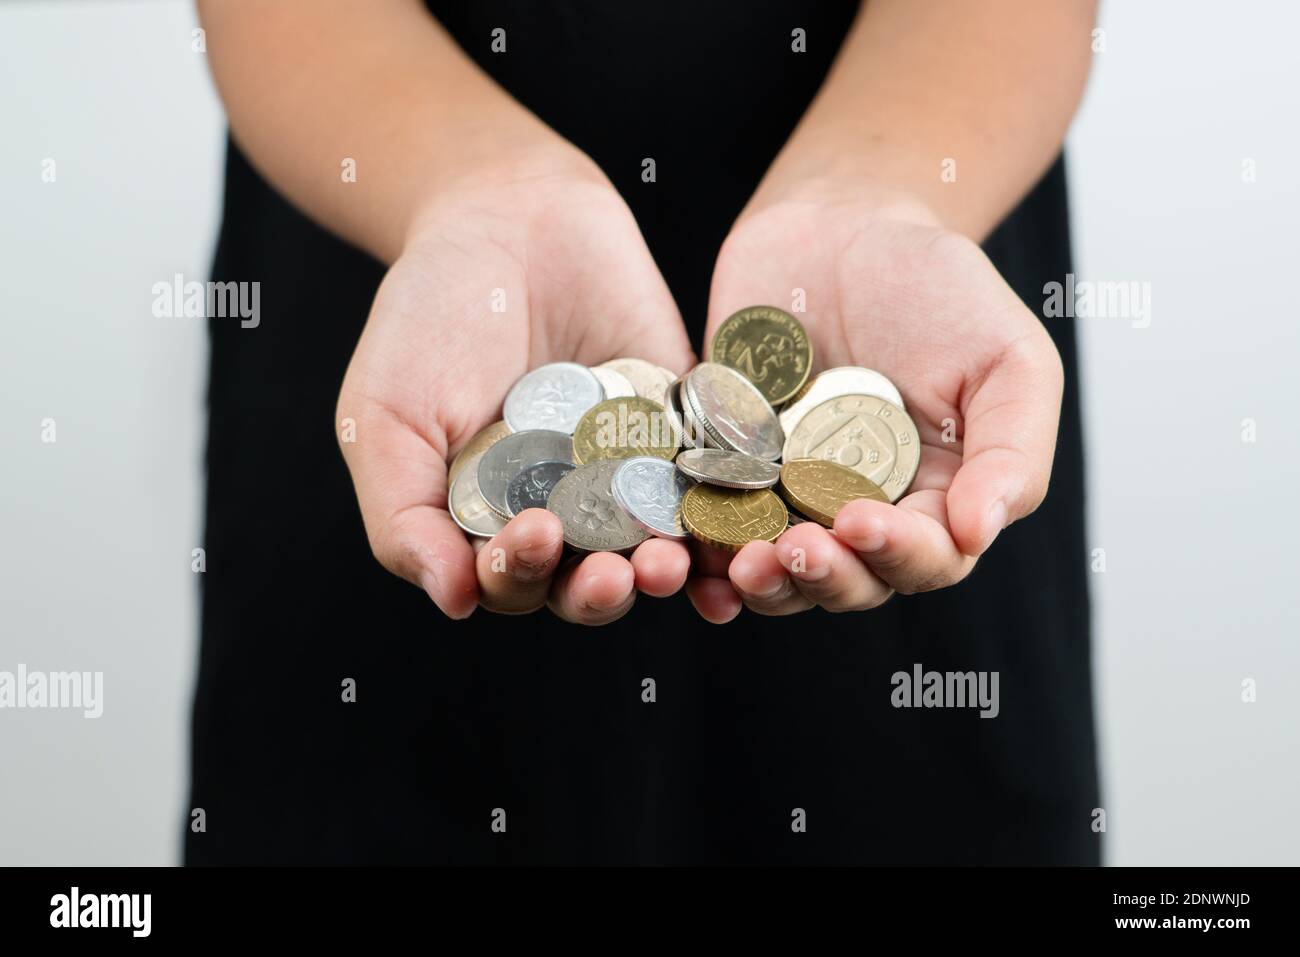 Midsection Of Girl Holding Coins Stock Photo